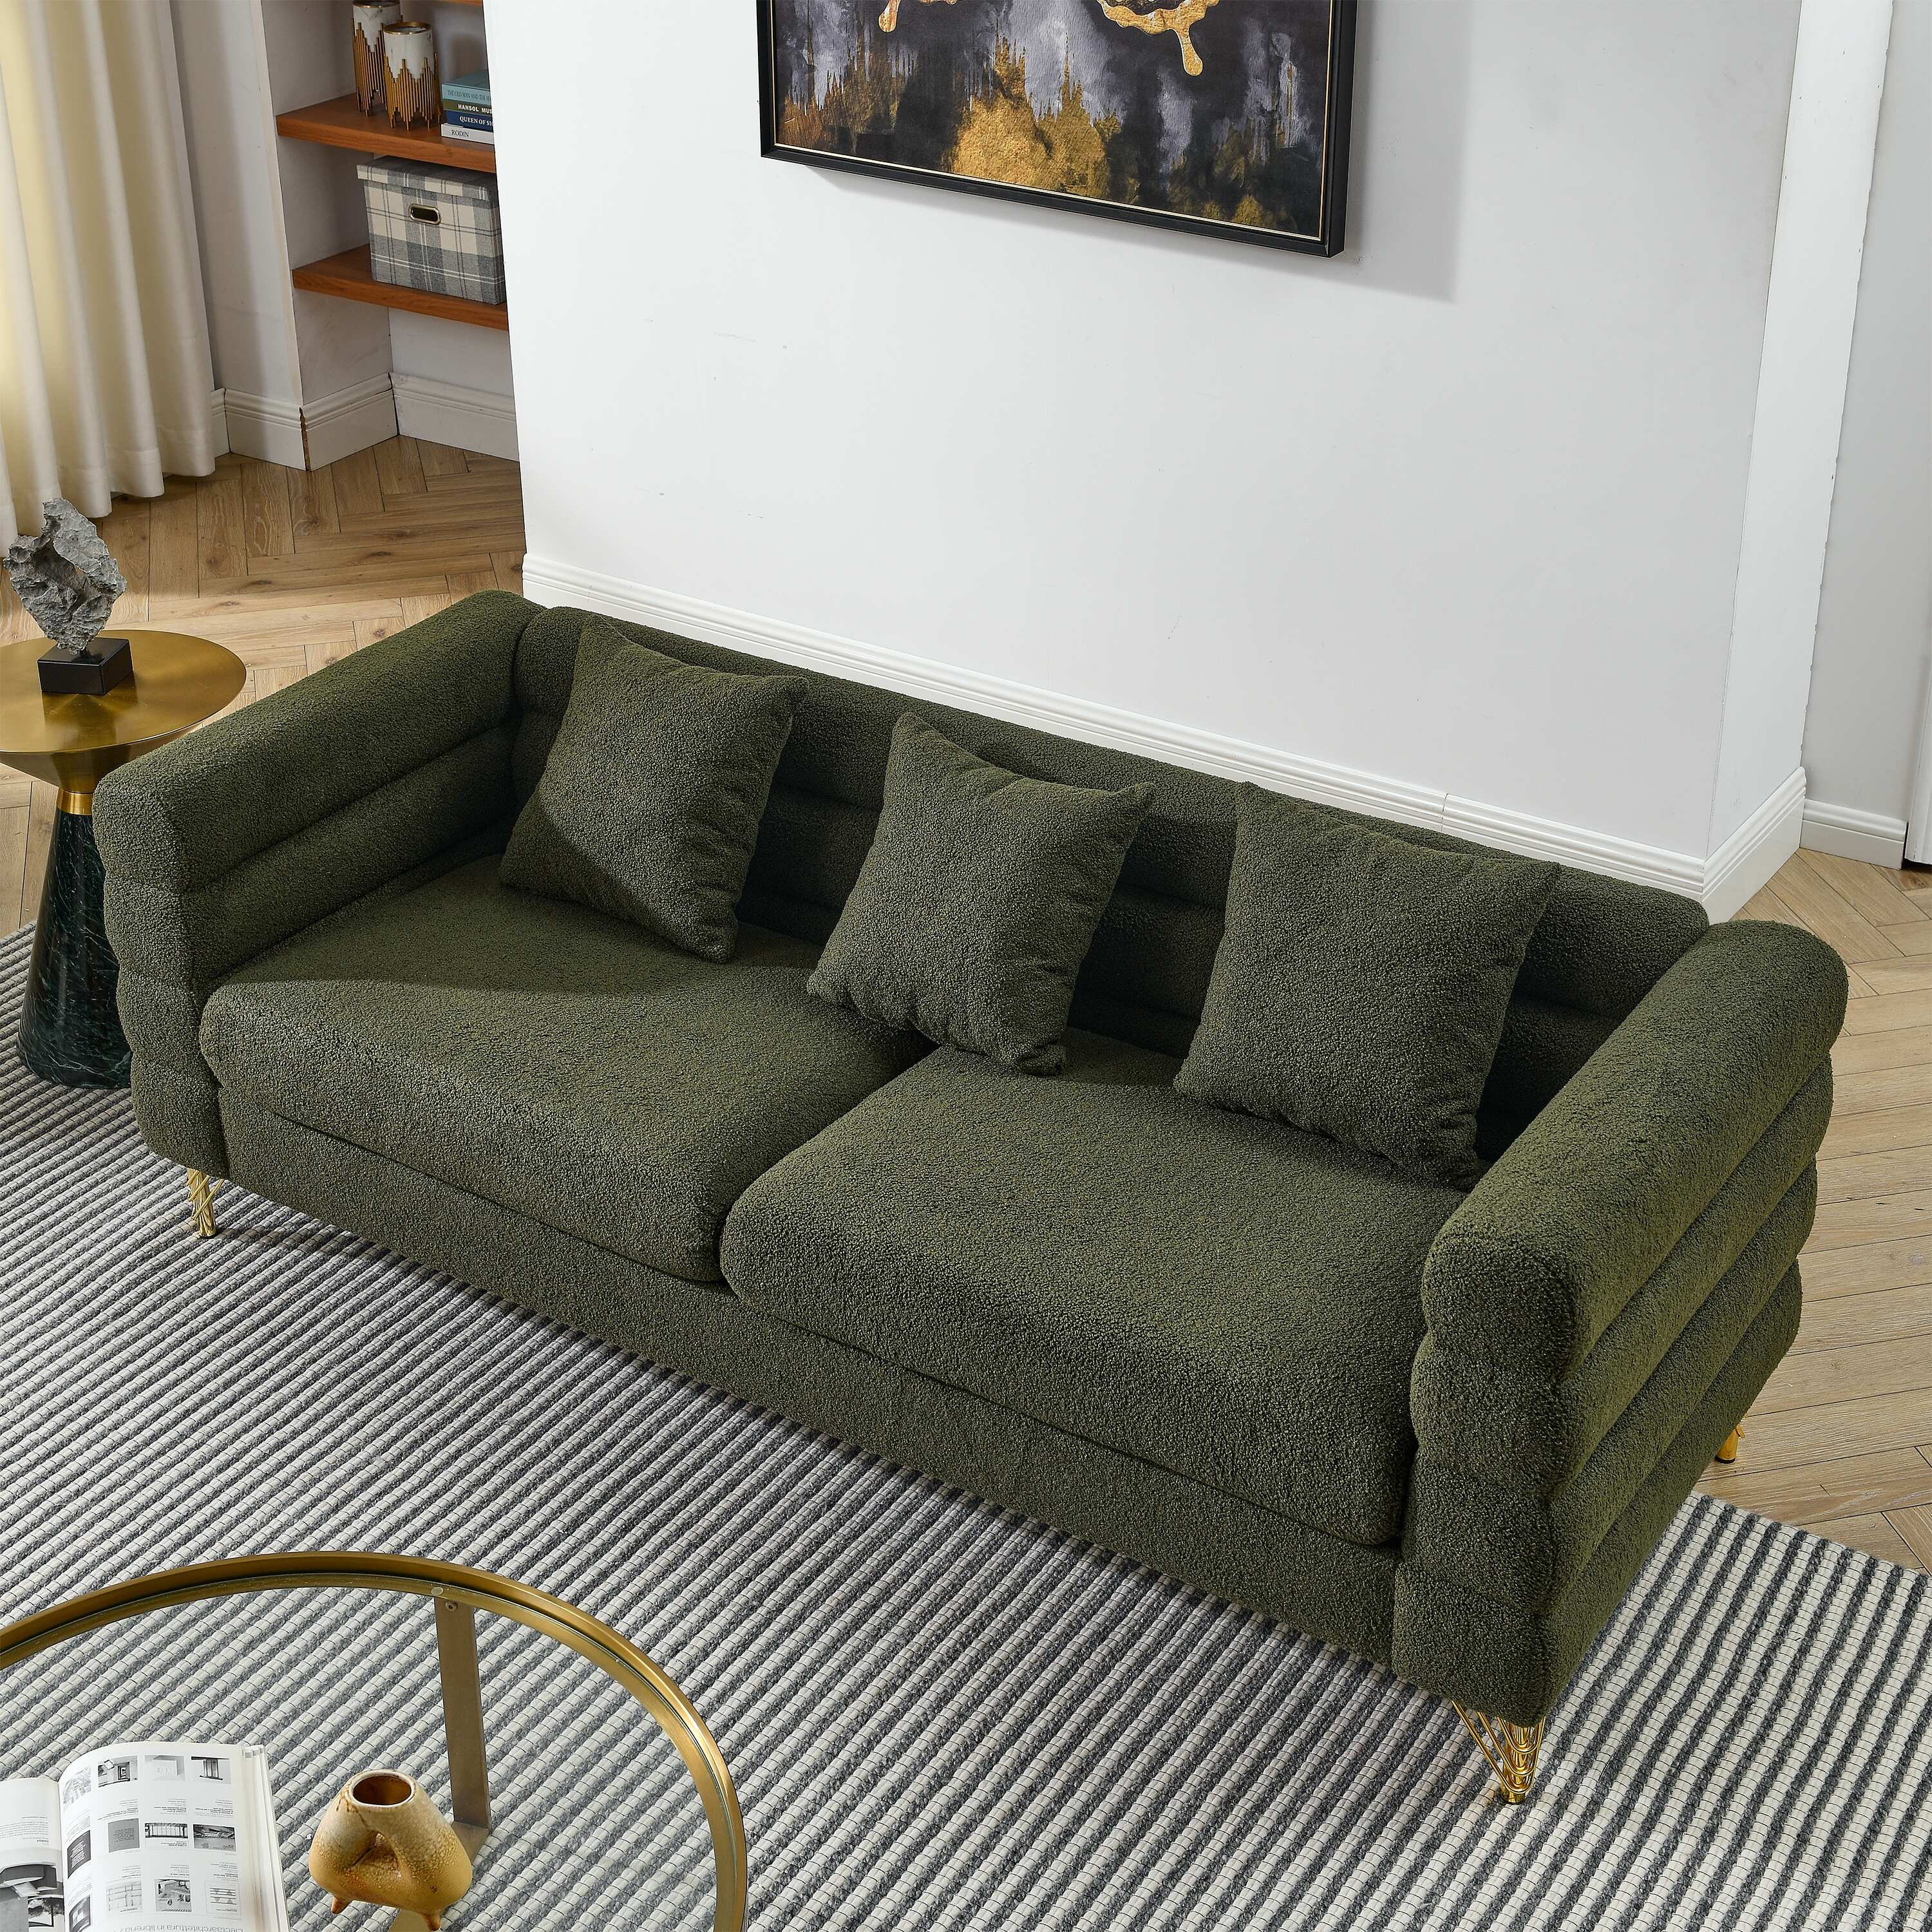 Soft Fabric Sofas w/ 3 Pillows, Comfy Sofa Loveseat Couch